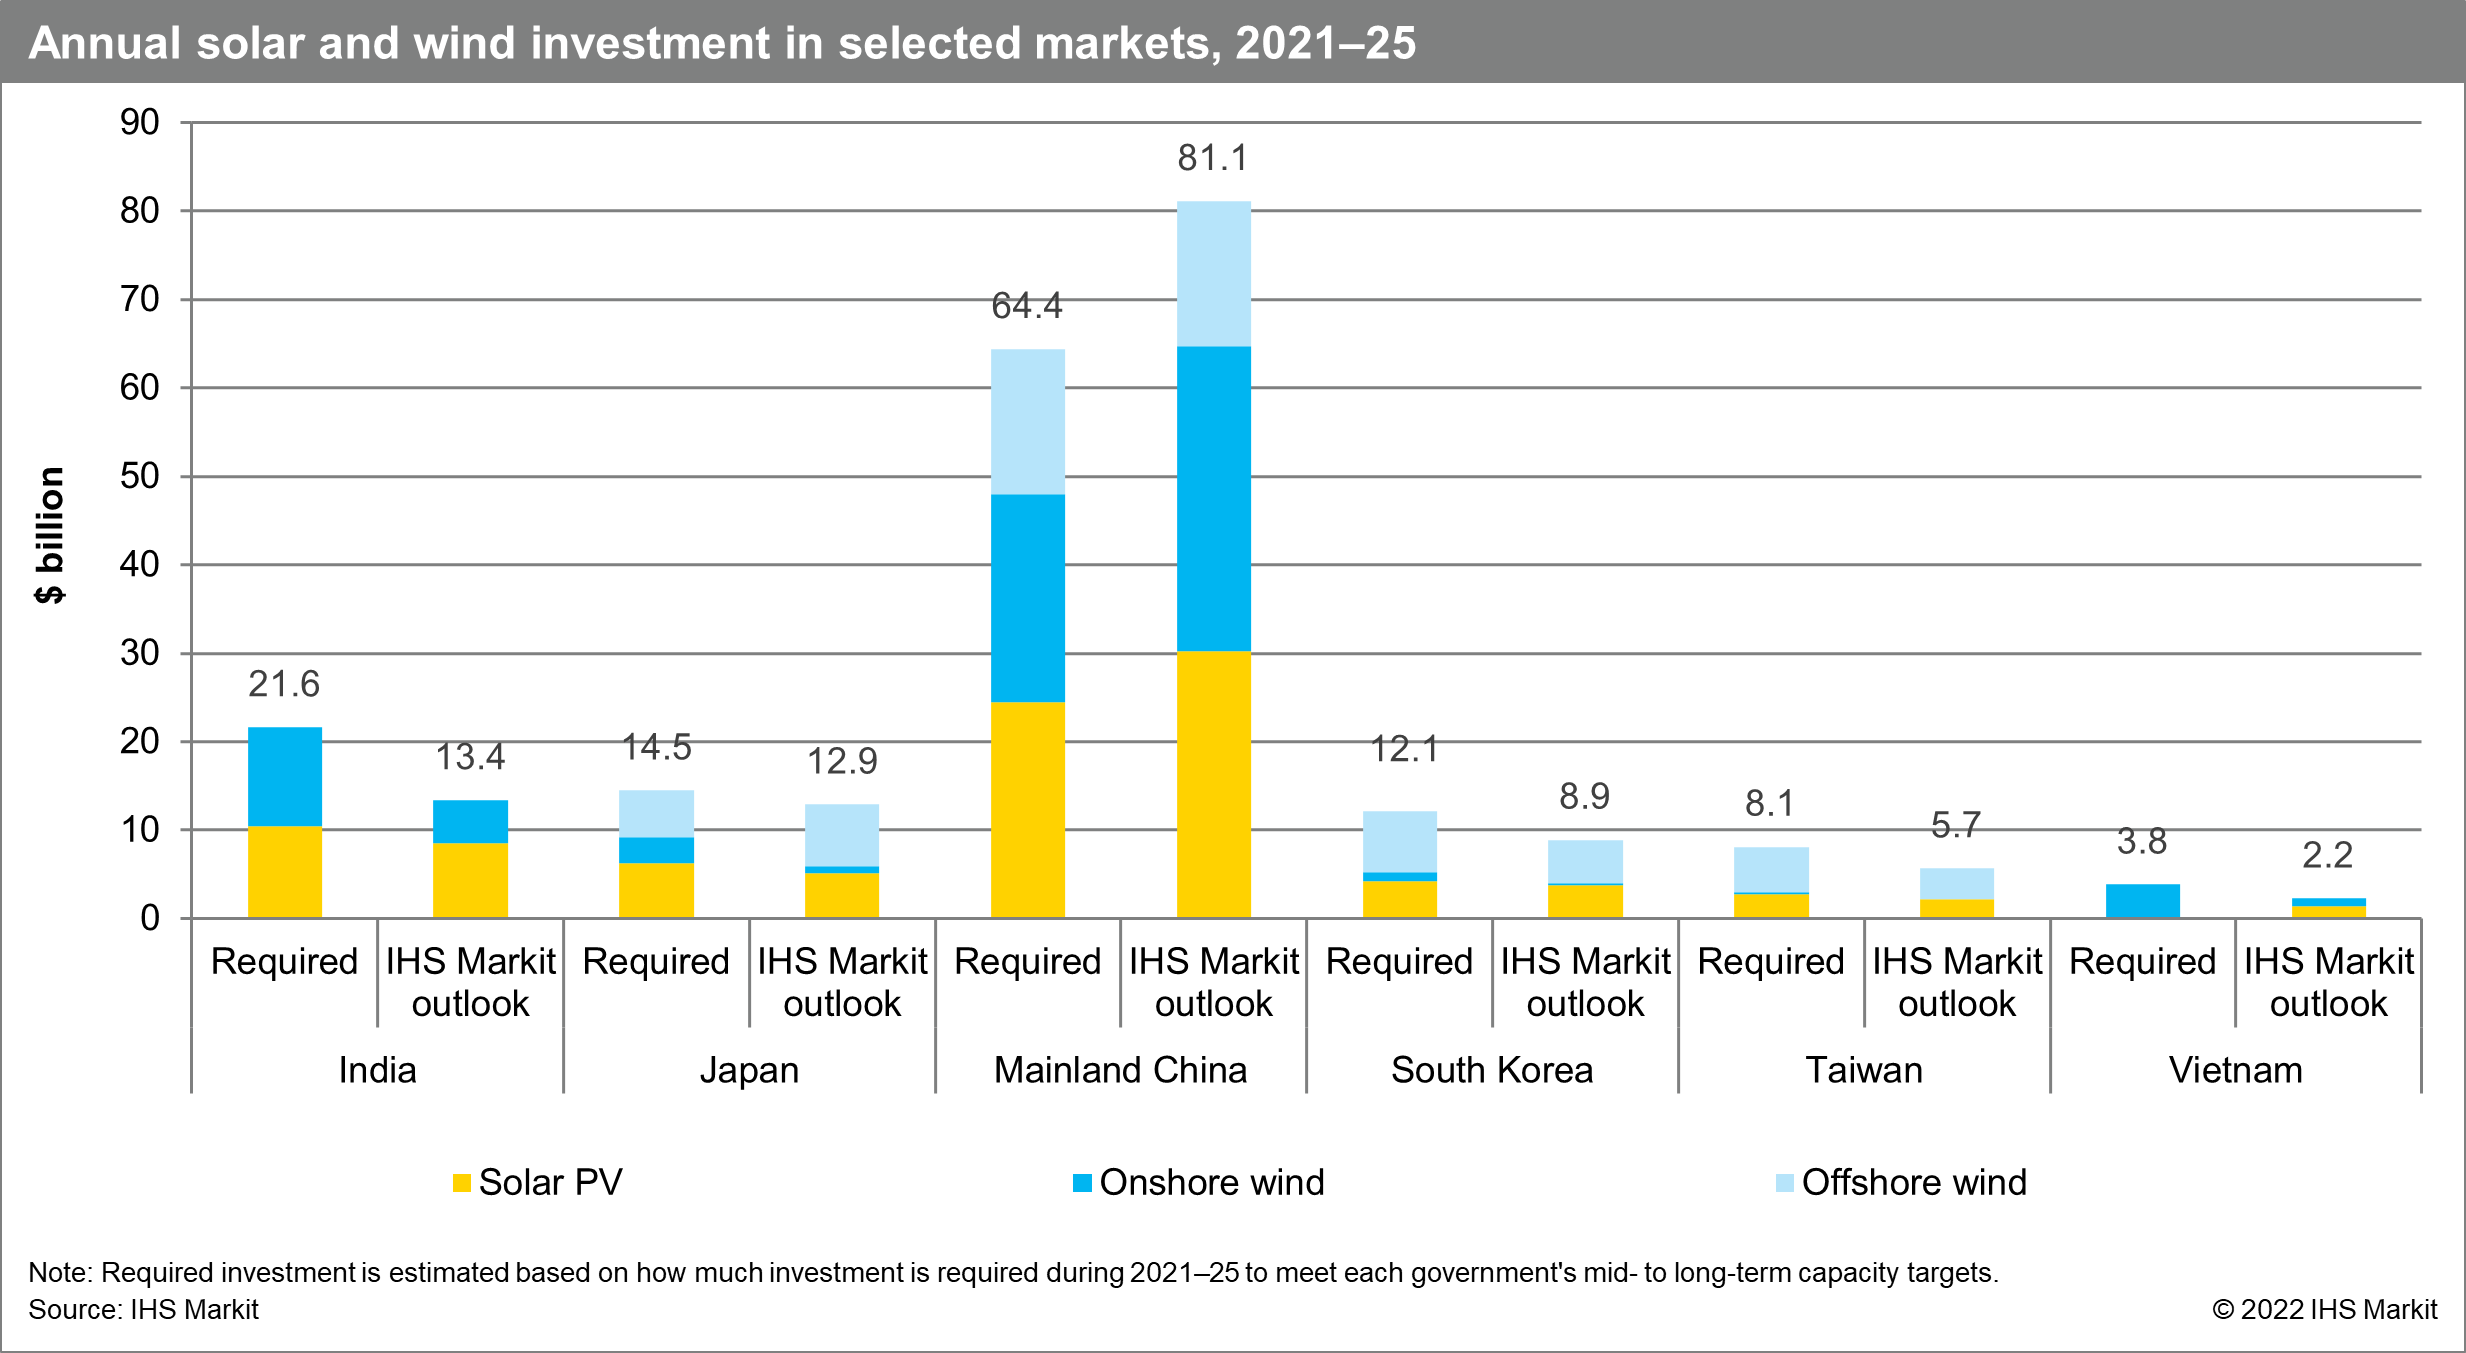 Annual solar and wind investment in selected markets, 2021-25